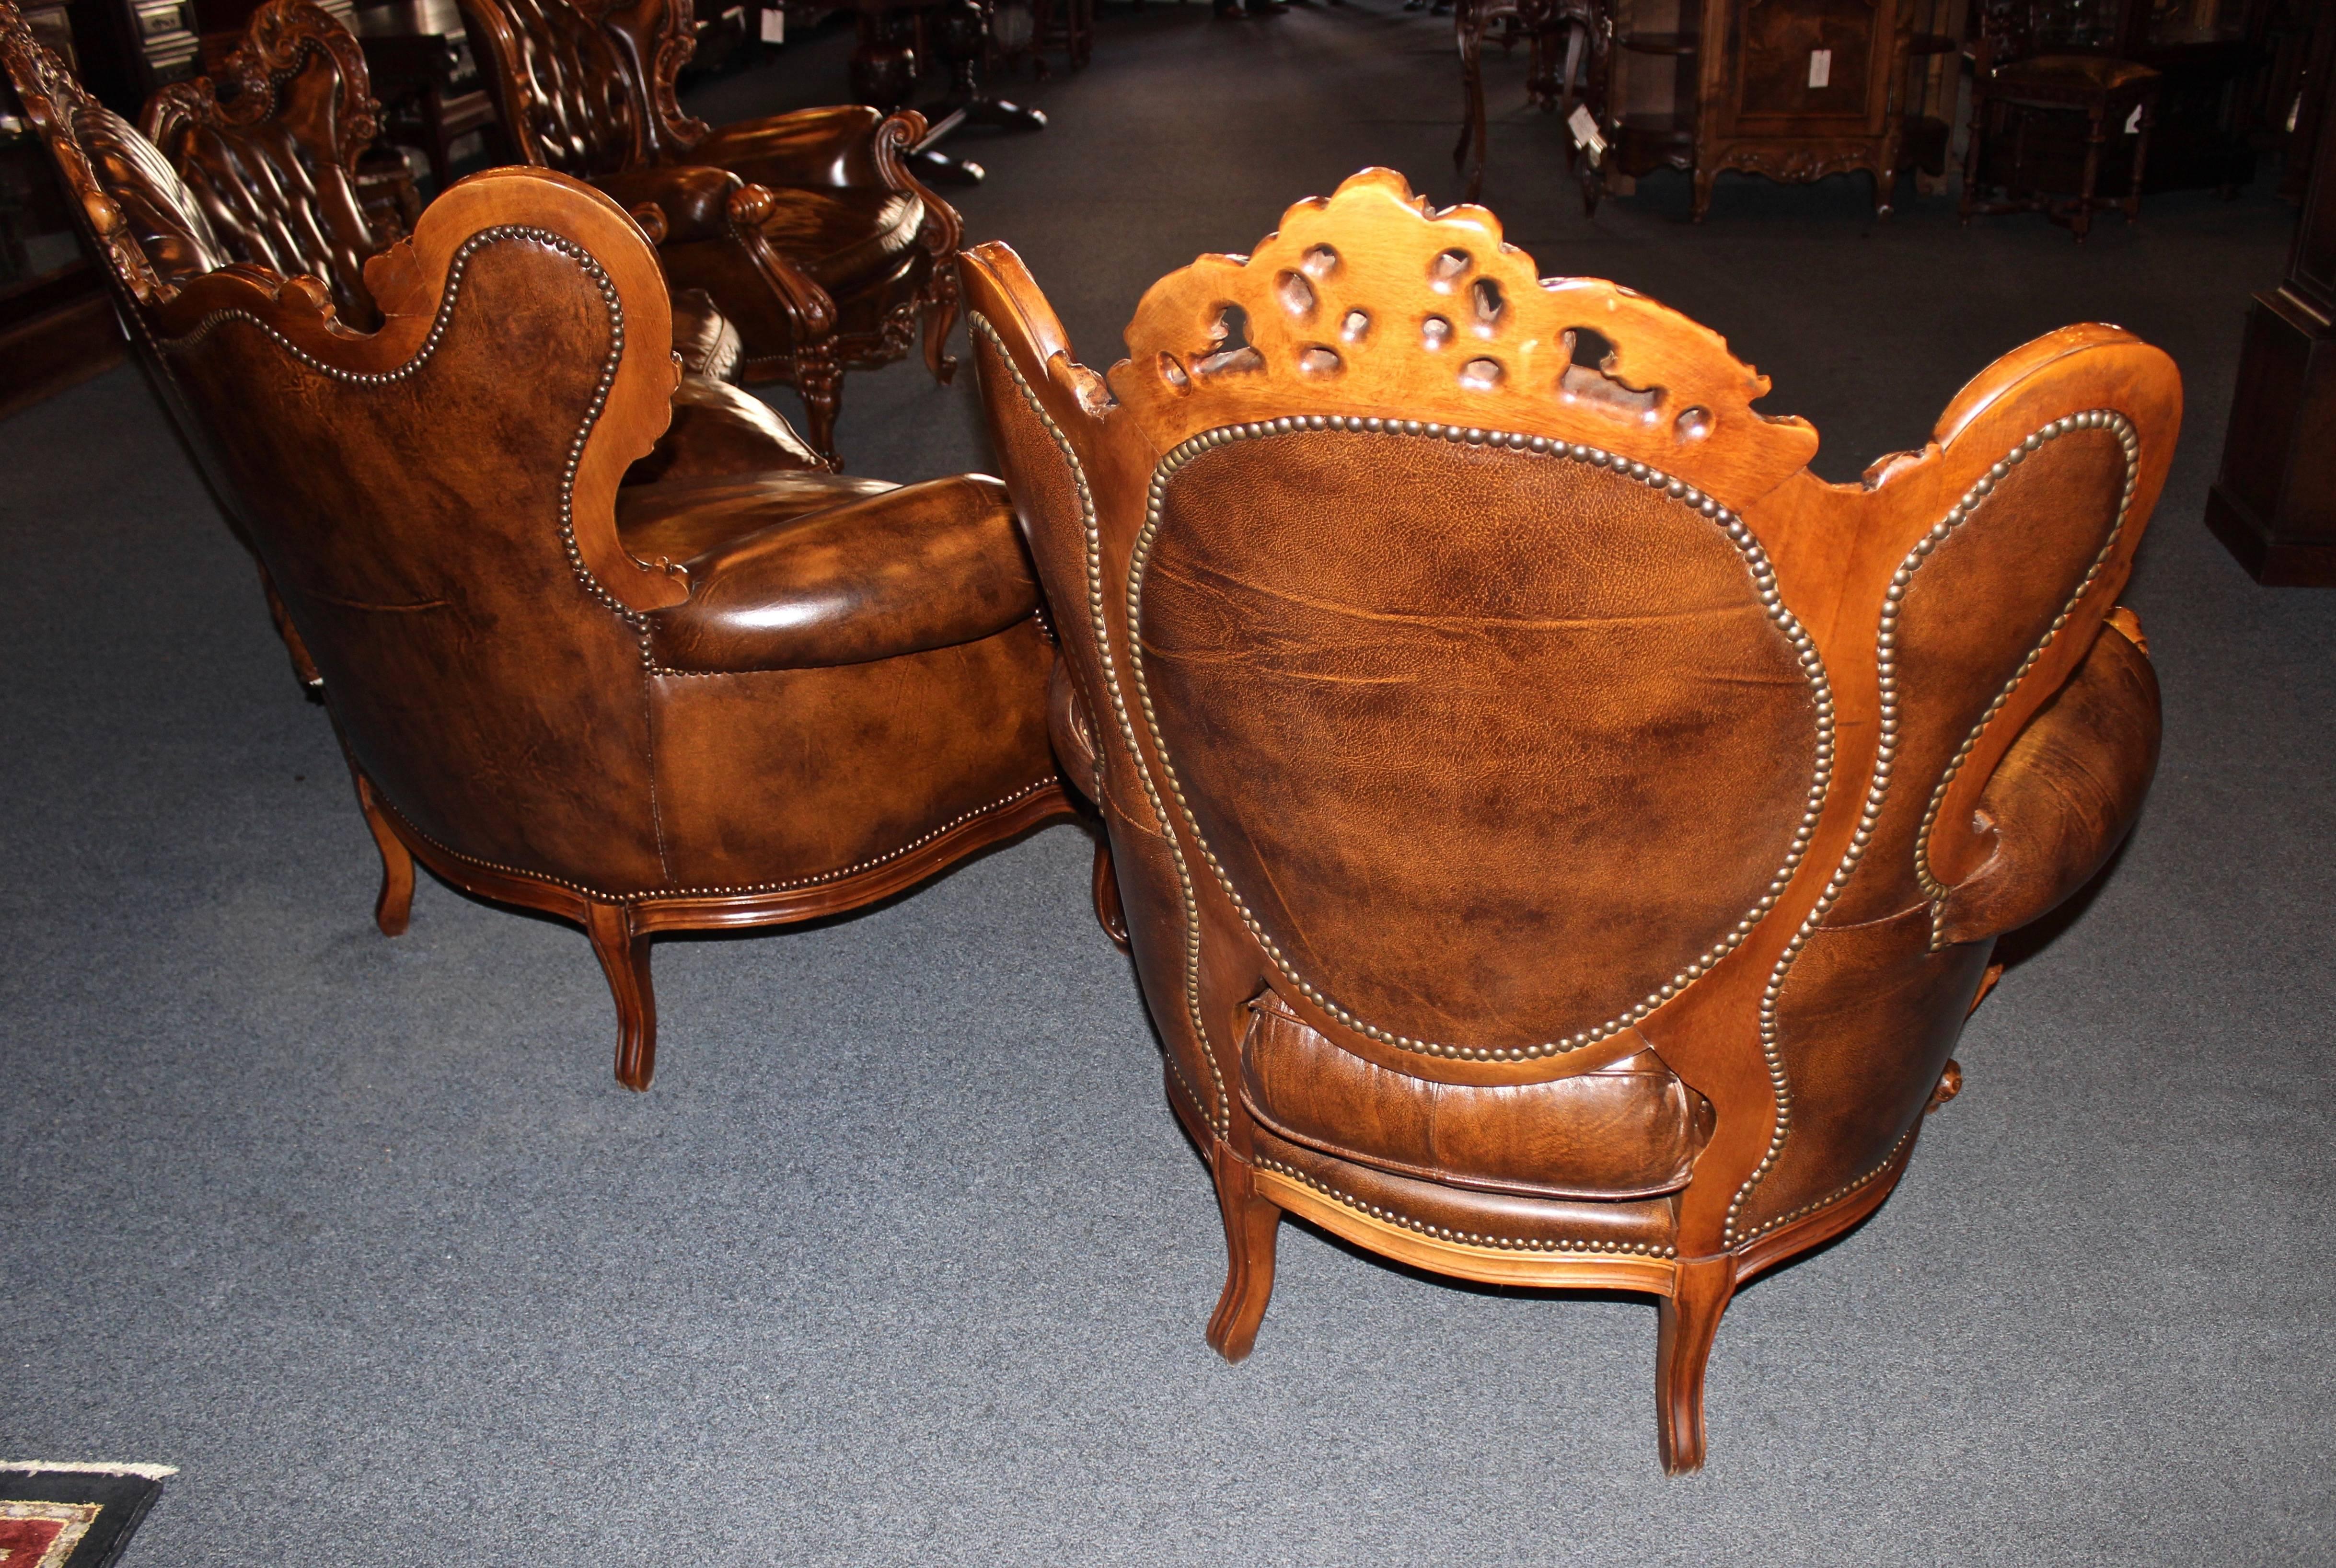 20th Century French Rococo Three-Piece Parlour Set For Sale 3